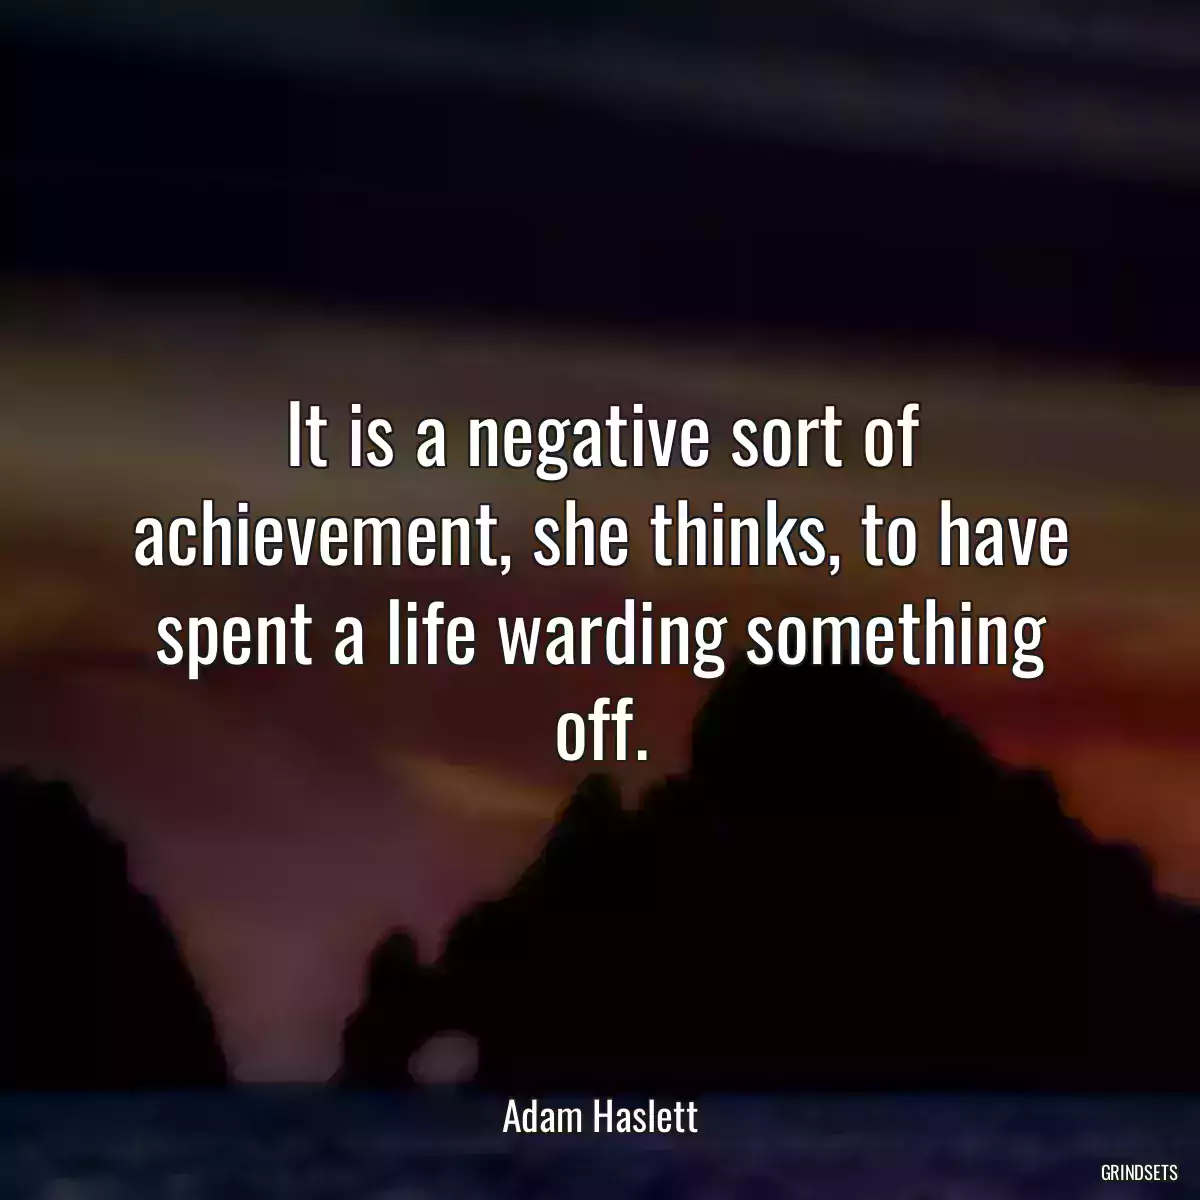 It is a negative sort of achievement, she thinks, to have spent a life warding something off.